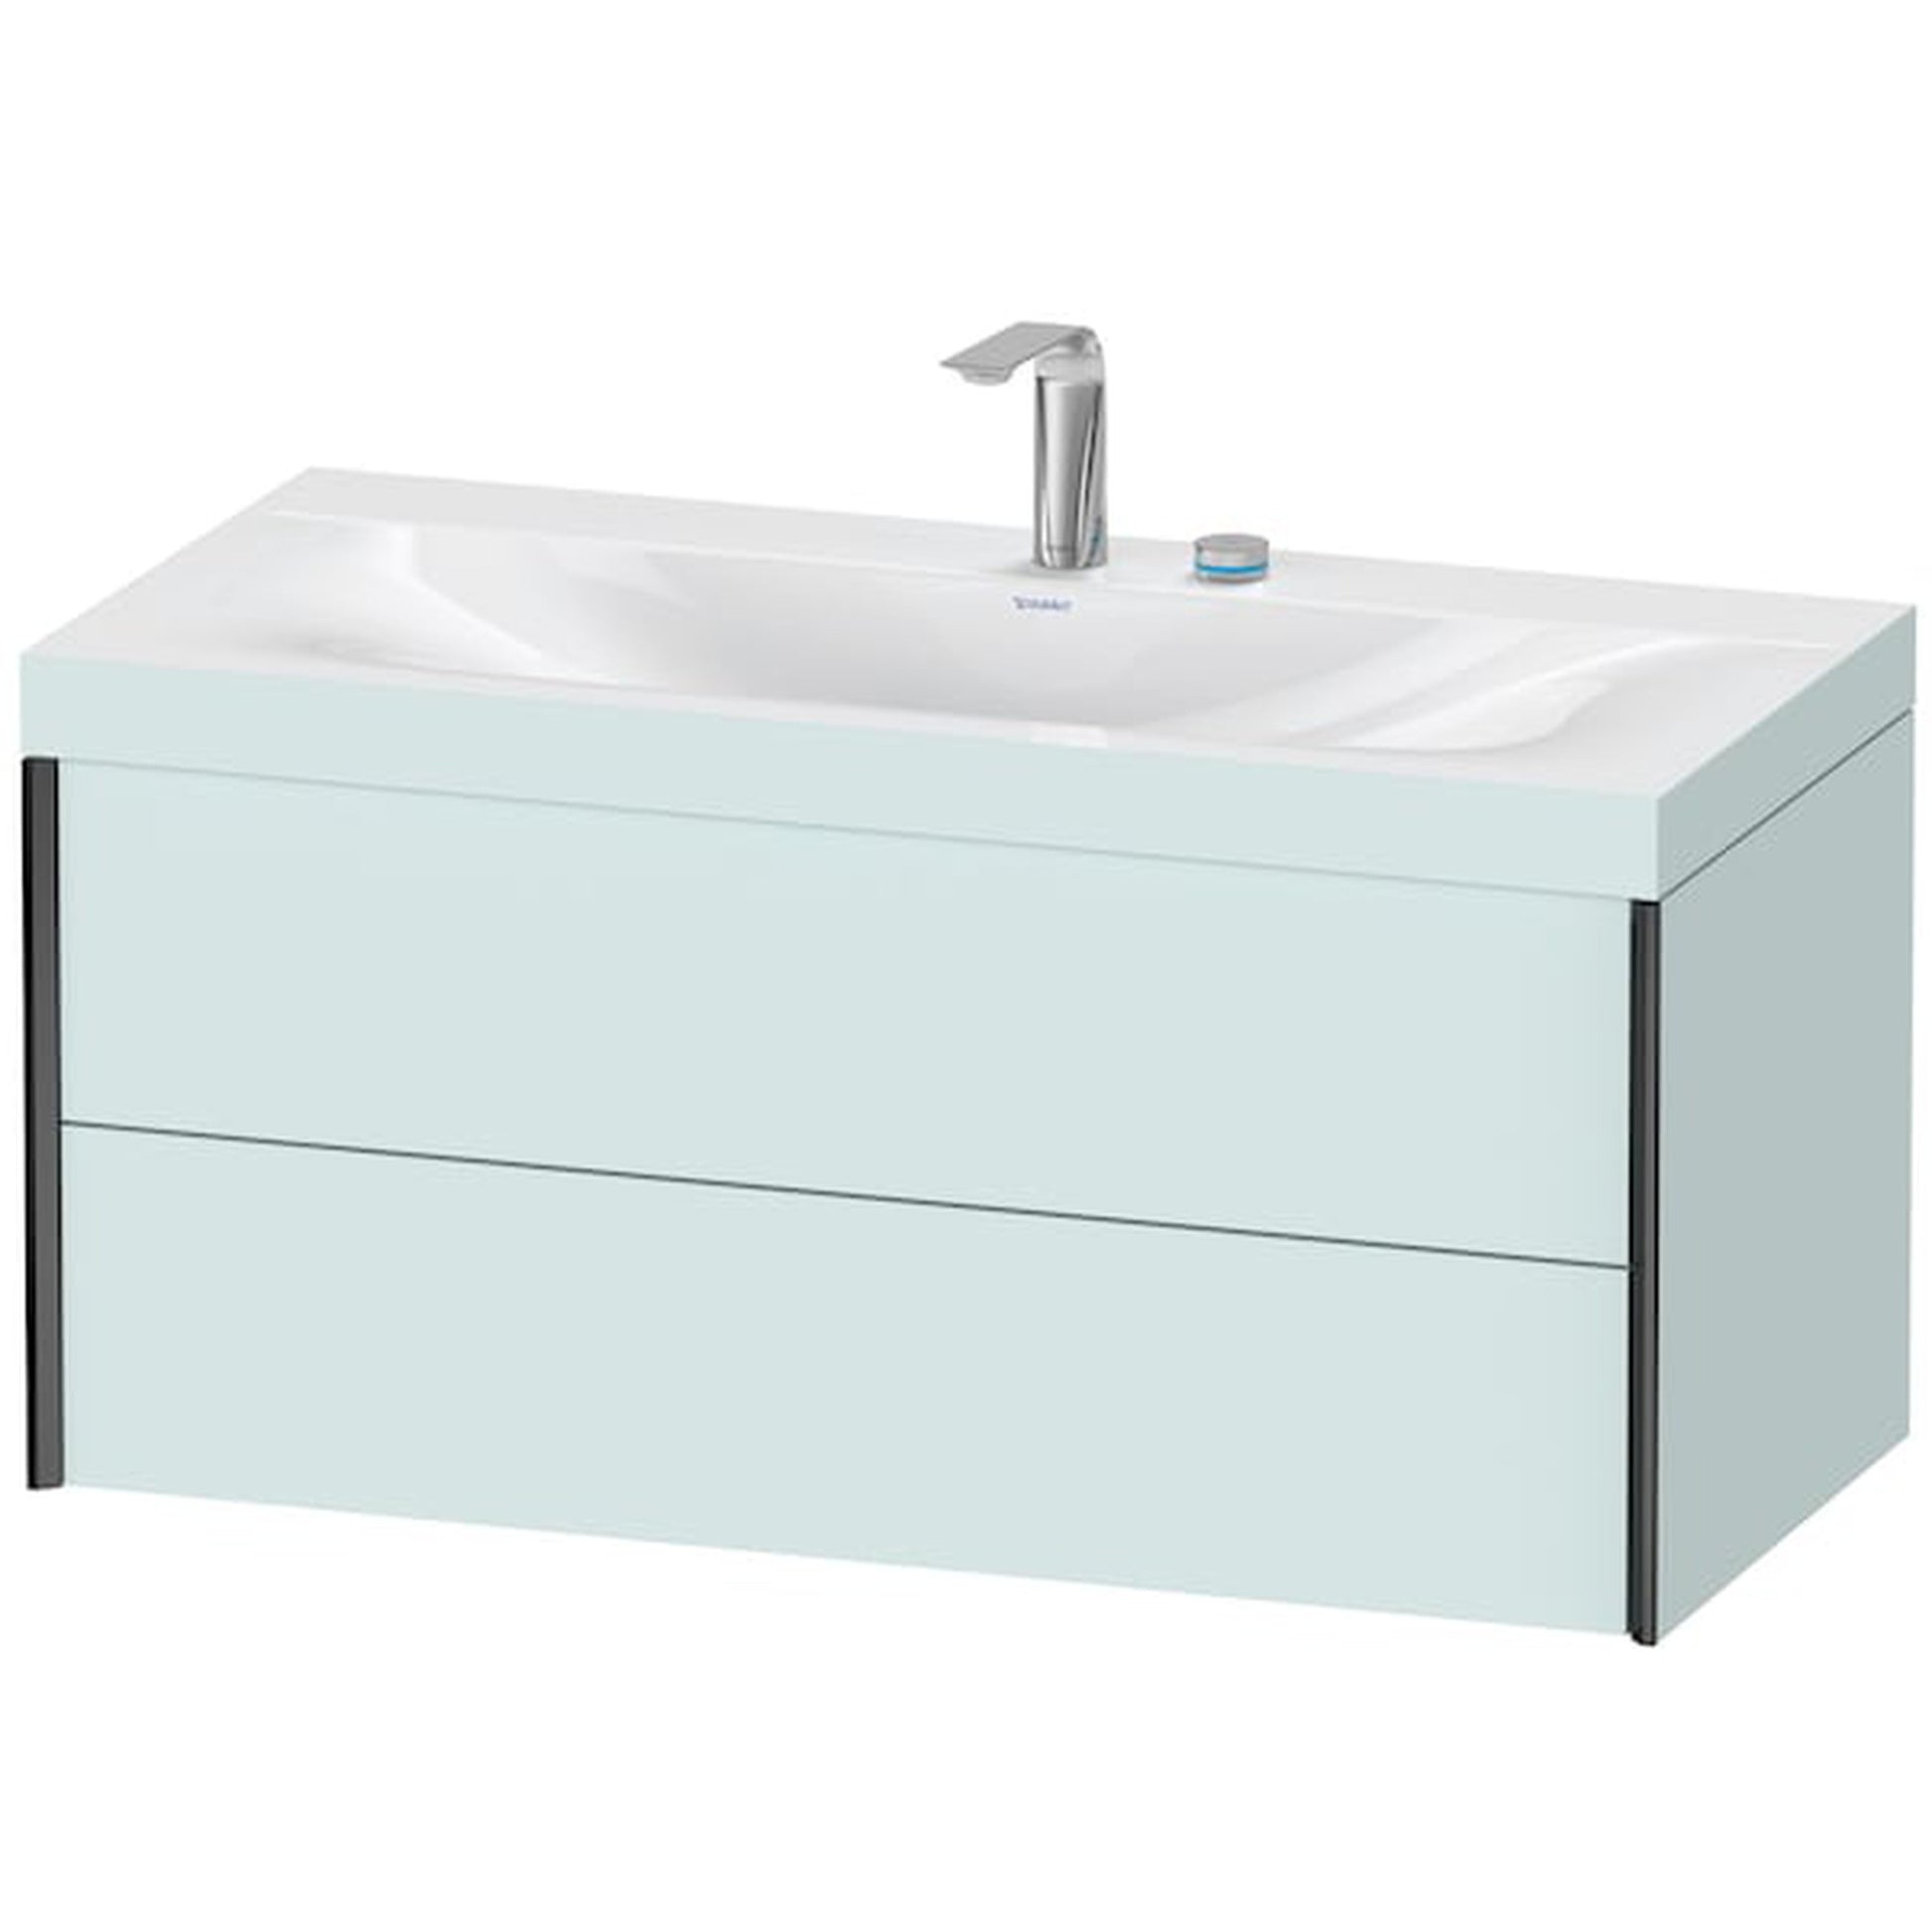 Duravit Xviu 39" x 20" x 19" Two Drawer C-Bonded Wall-Mount Vanity Kit With Two Tap Holes, Light Blue (XV4616EB209C)